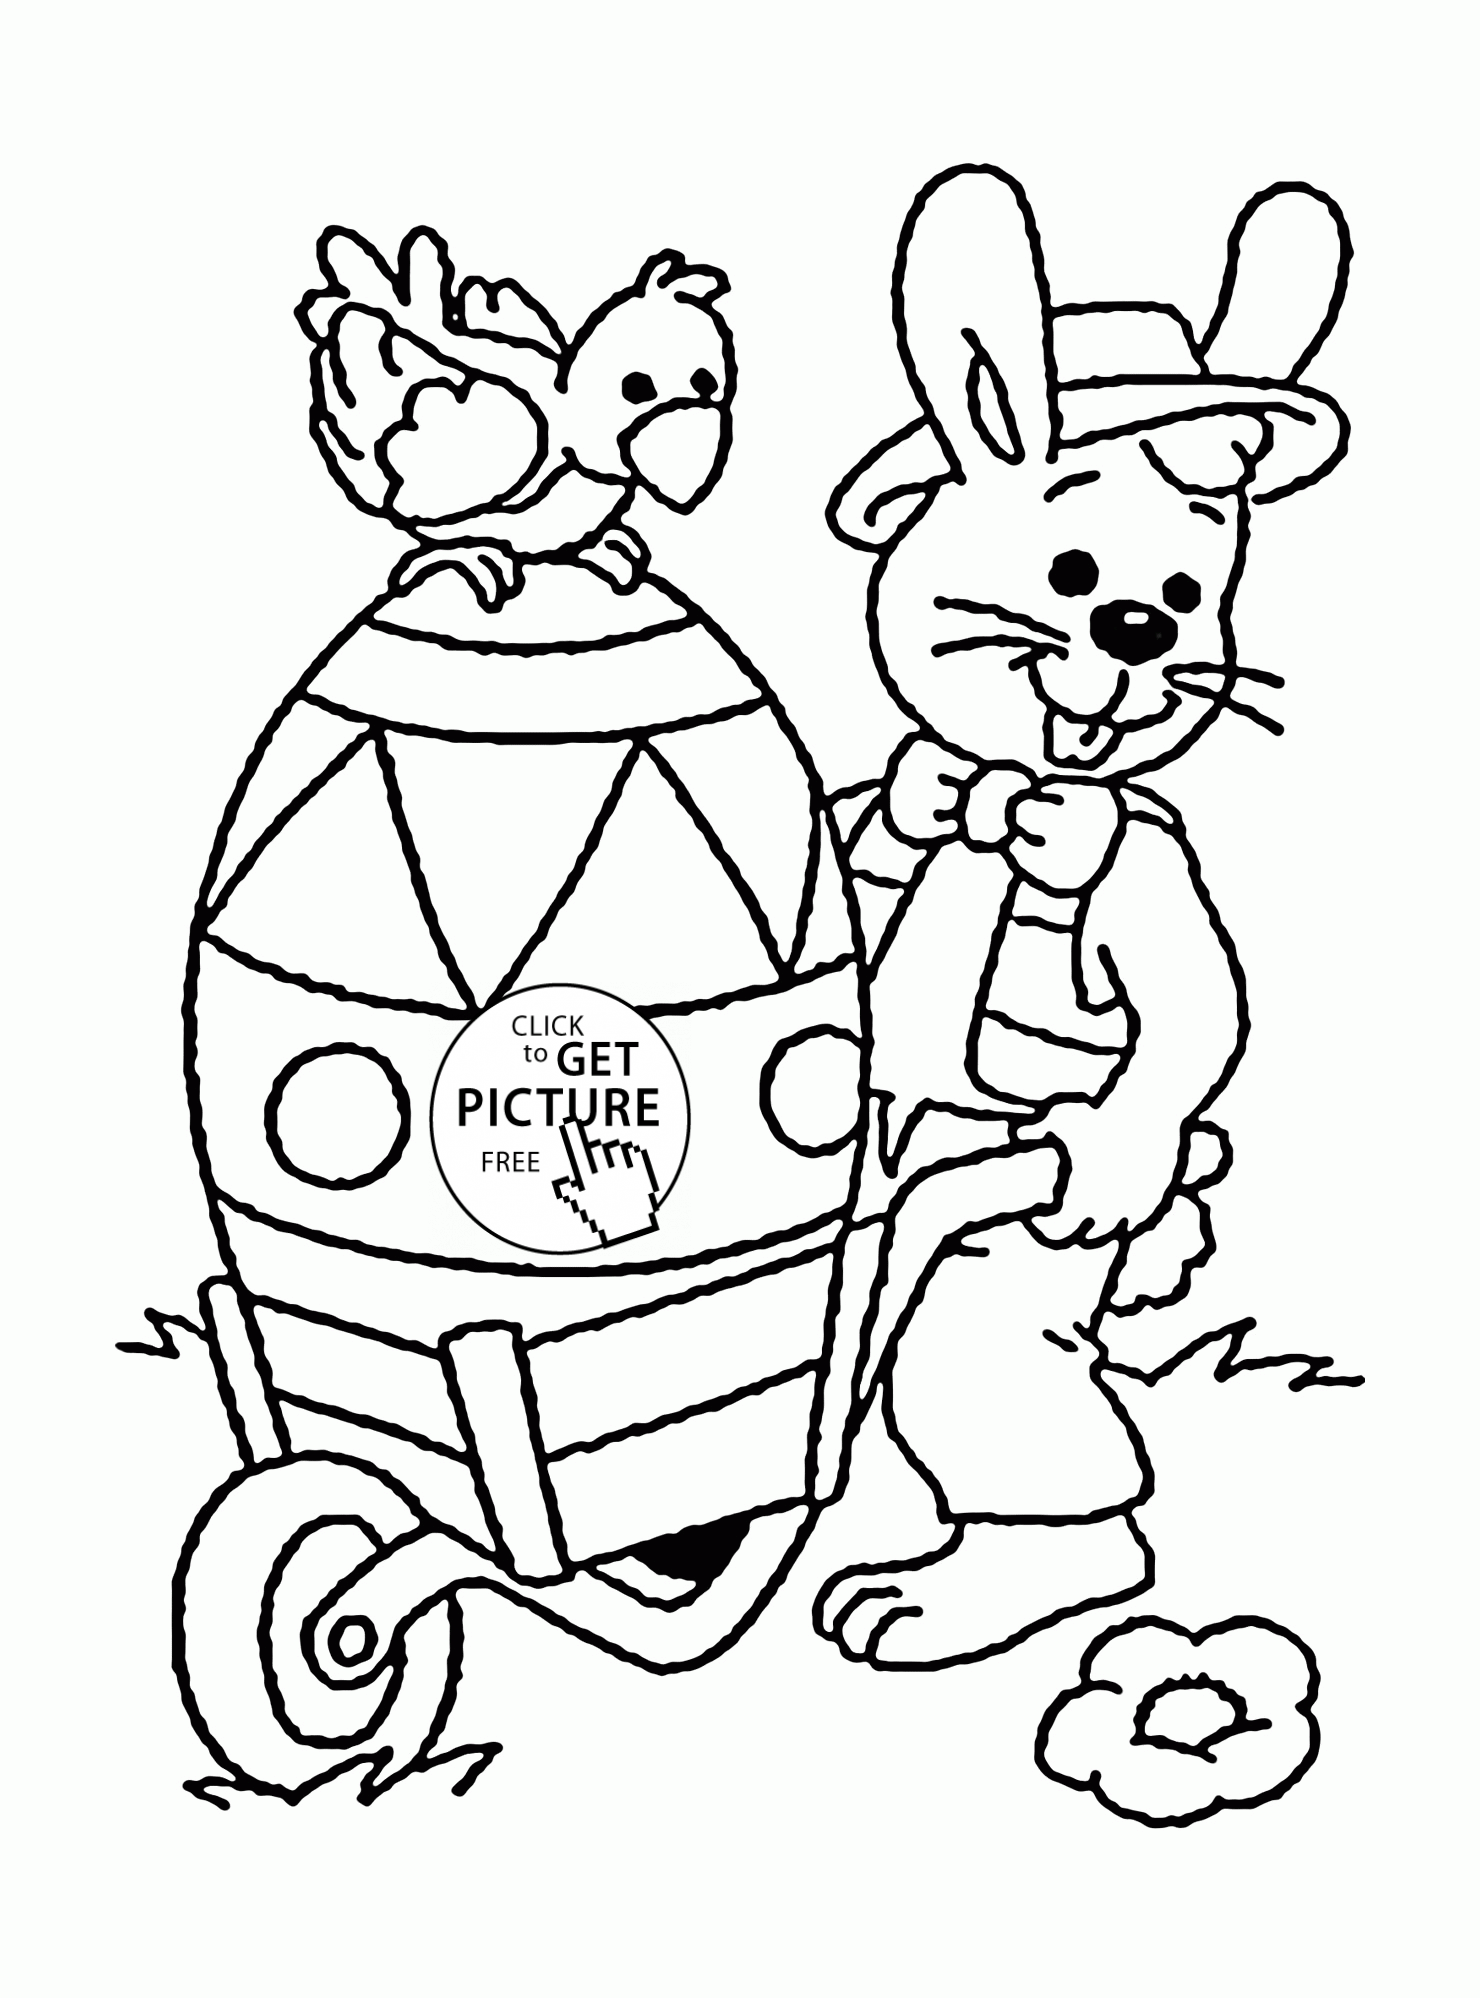 Happy Easter Bunny coloring page for kids, coloring pages ...